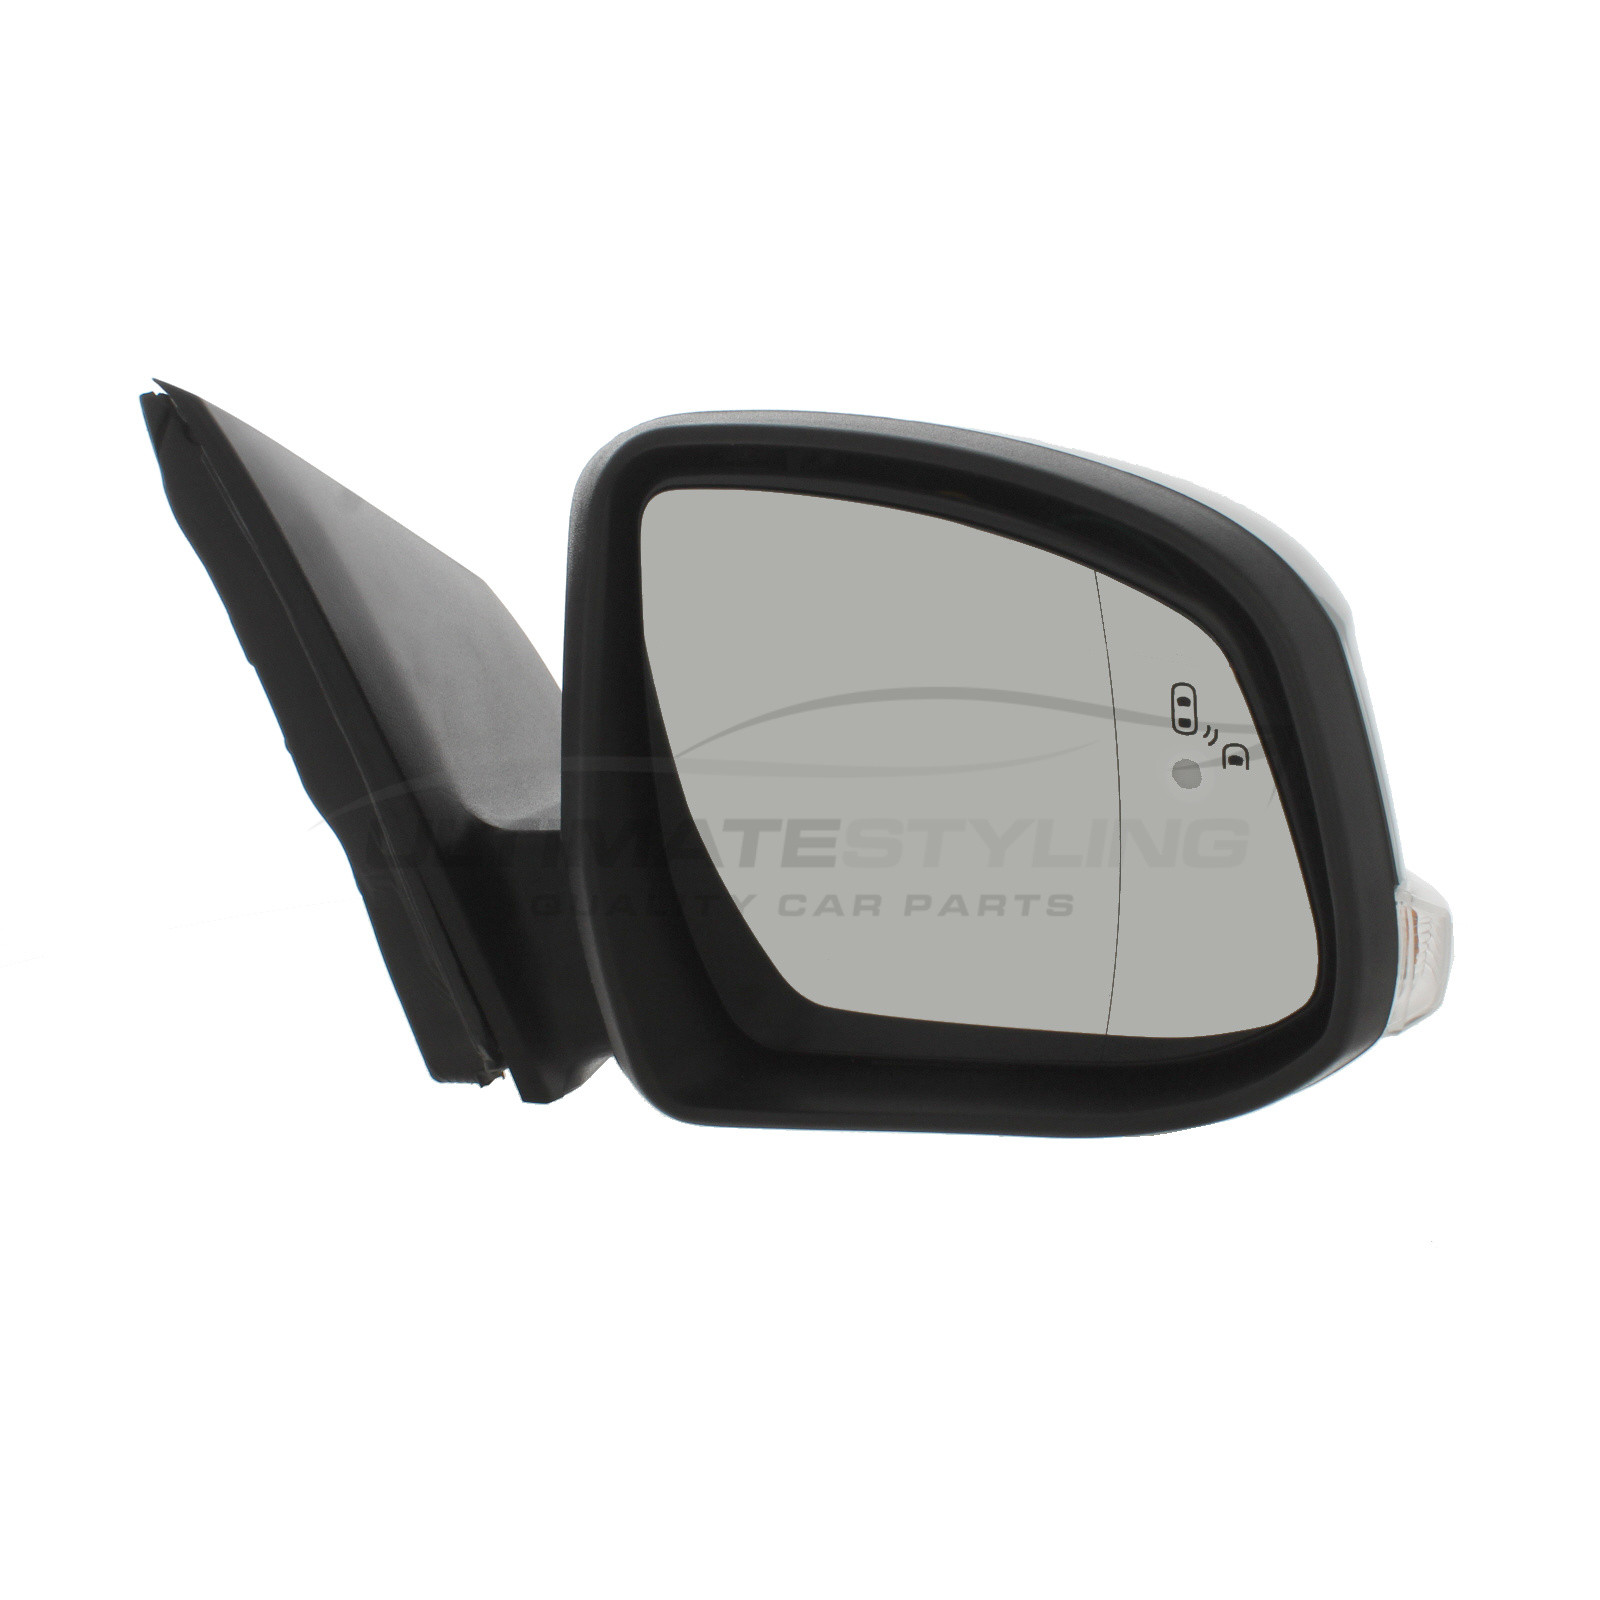 Elu Ford Focus 2007 Right  electric wing mirror E9014292 SLK4974 